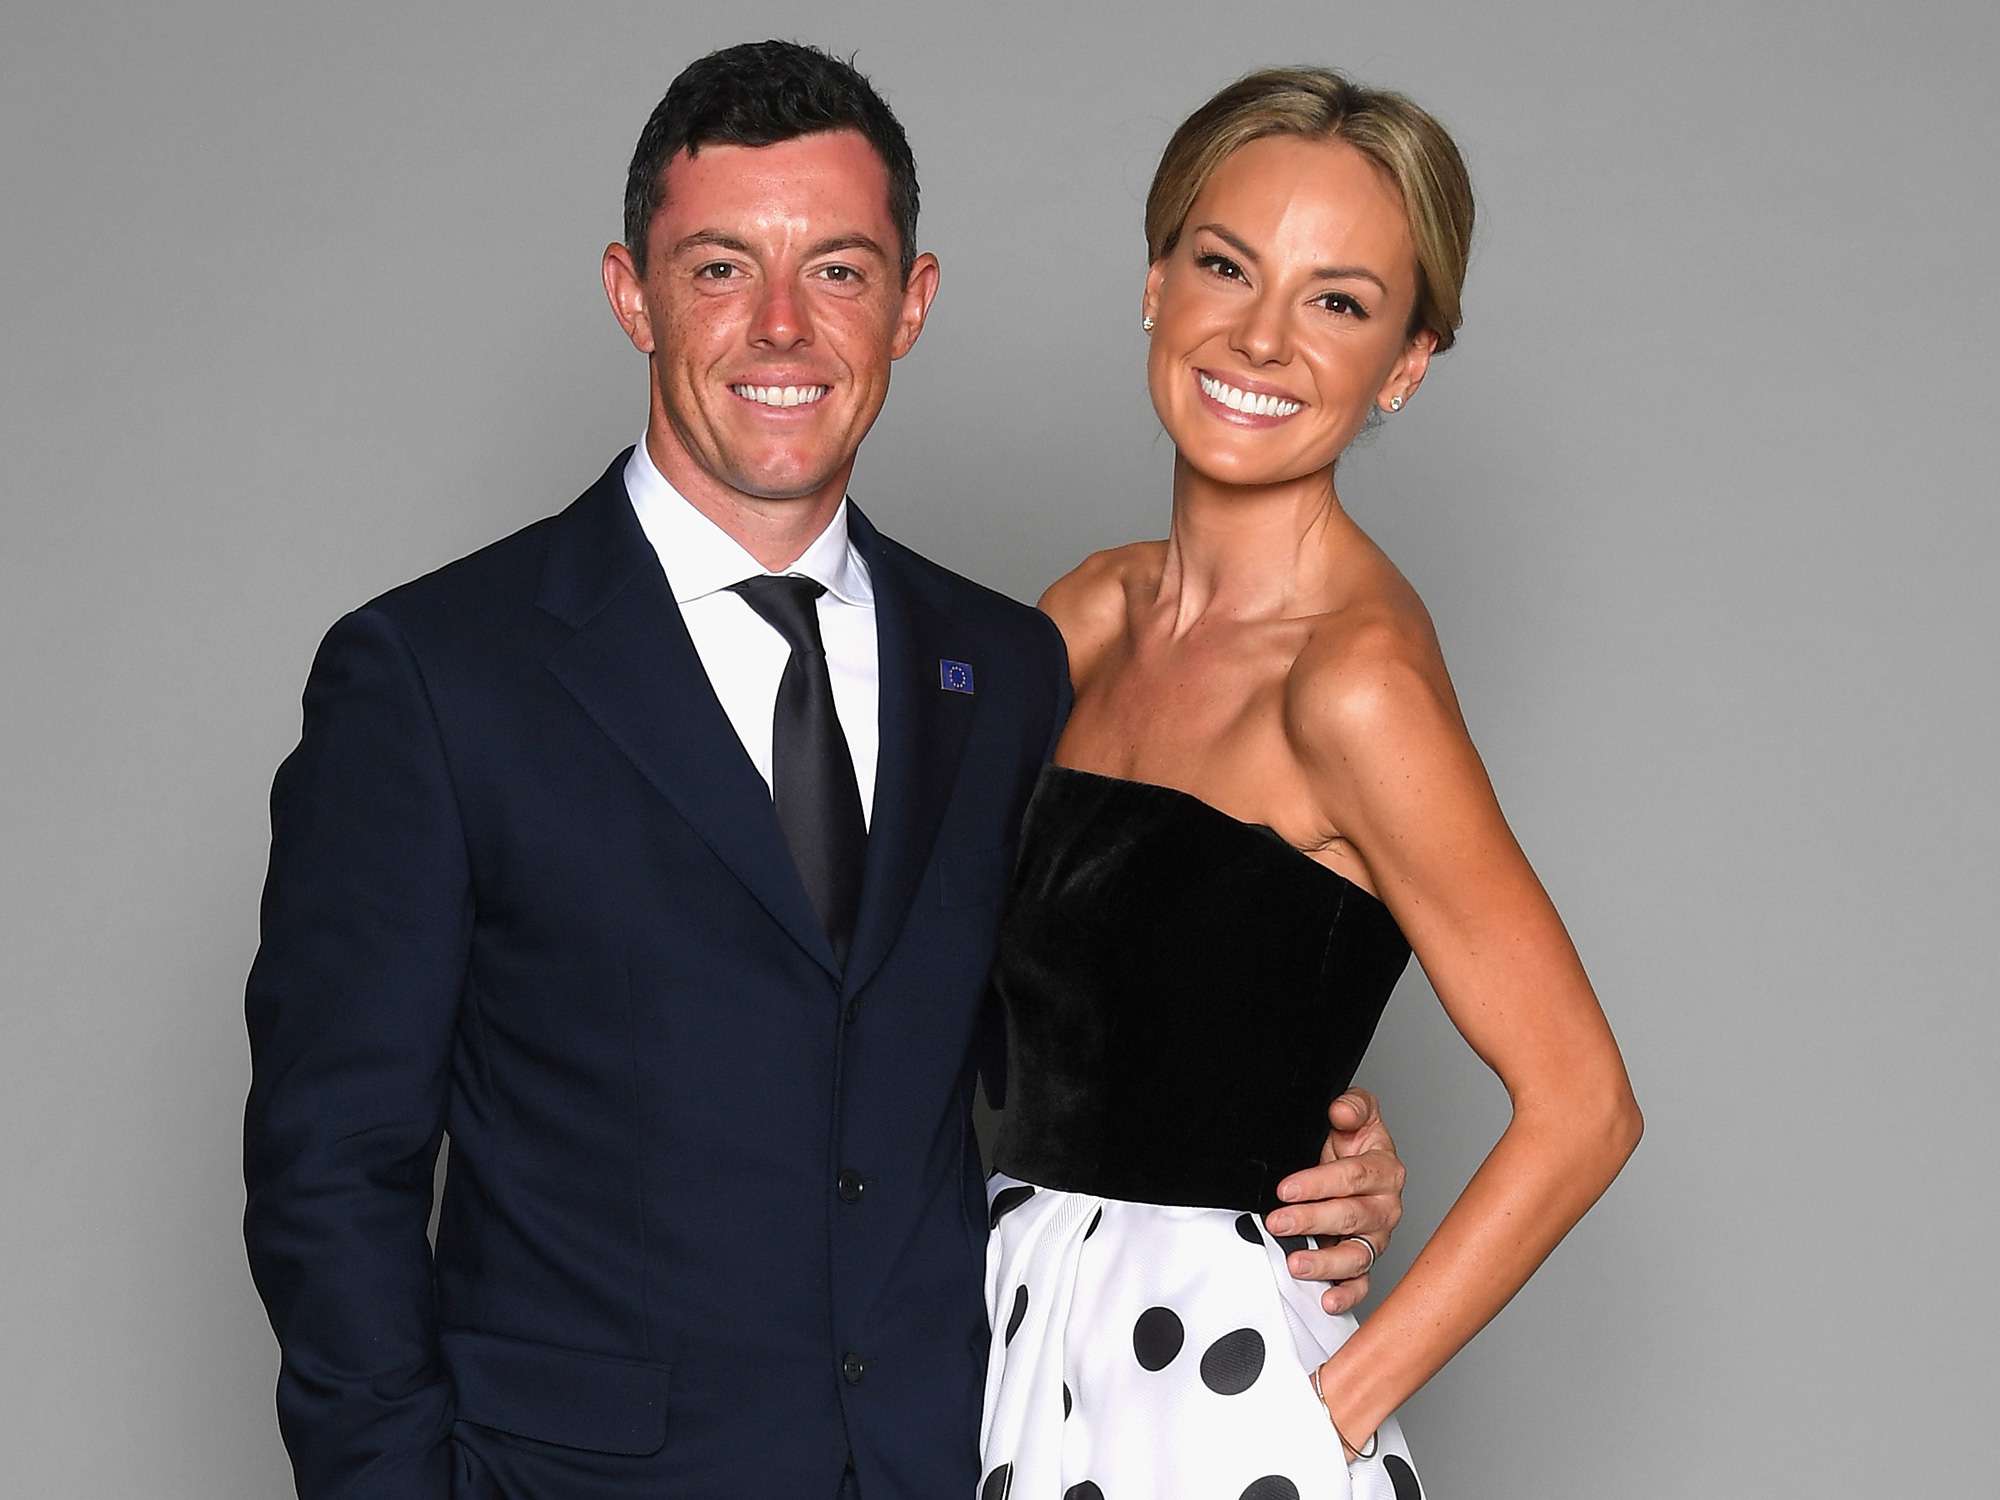 Rory McIlroy of Europe poses with his wife Erica McIlroy prior to the 2018 Ryder Cup Gala at the Palace of Versailles on September 26, 2018